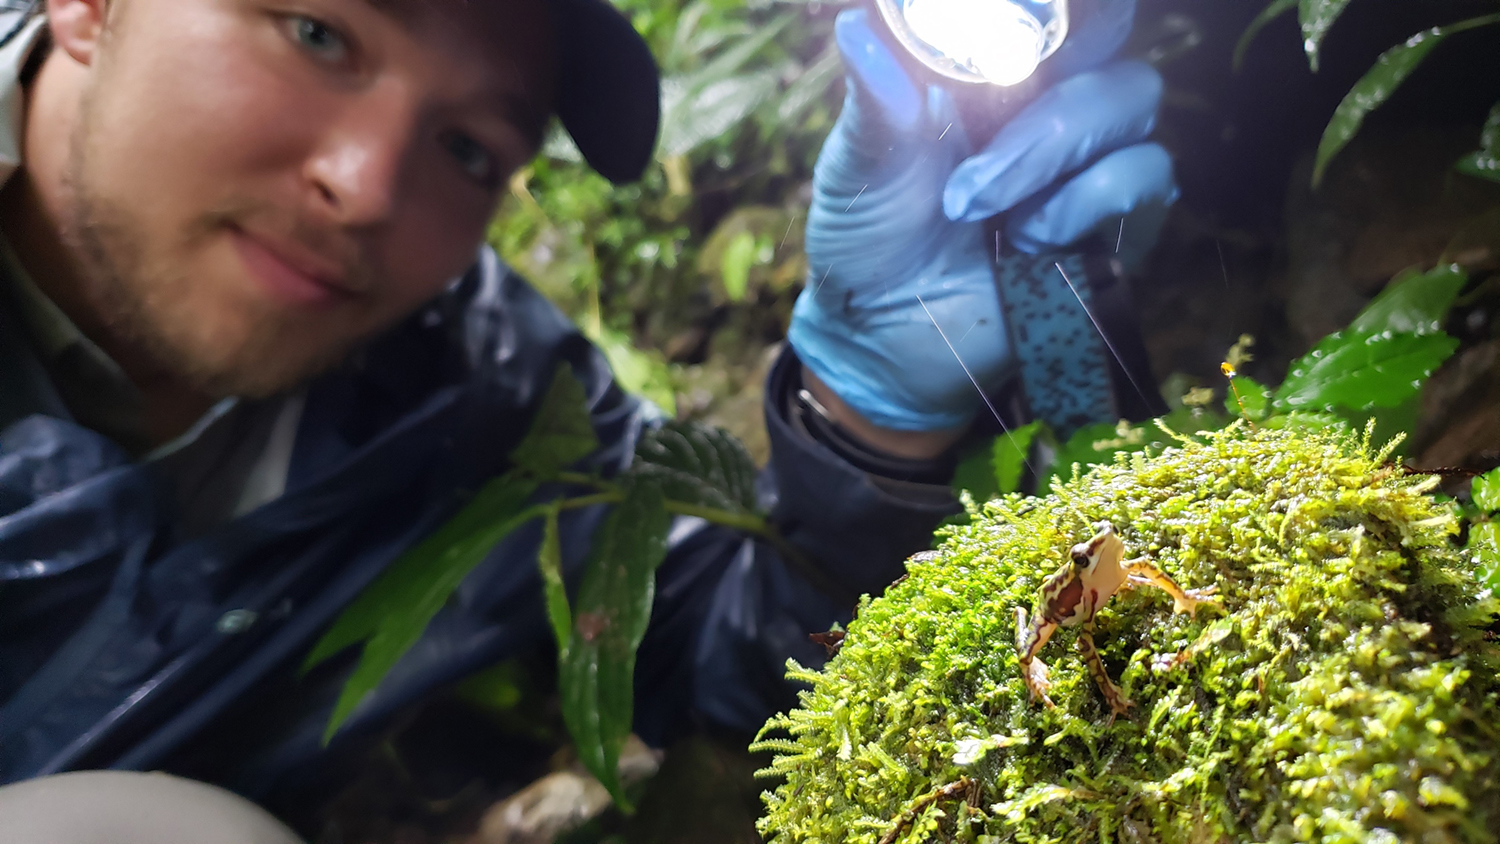 MSU doctoral student Kyle Jaynes shines a light on a harlequin frog (Atelopus coynei), which is striped and spotted with earthy tones, sitting on a patch of green moss.”/>
<em class=